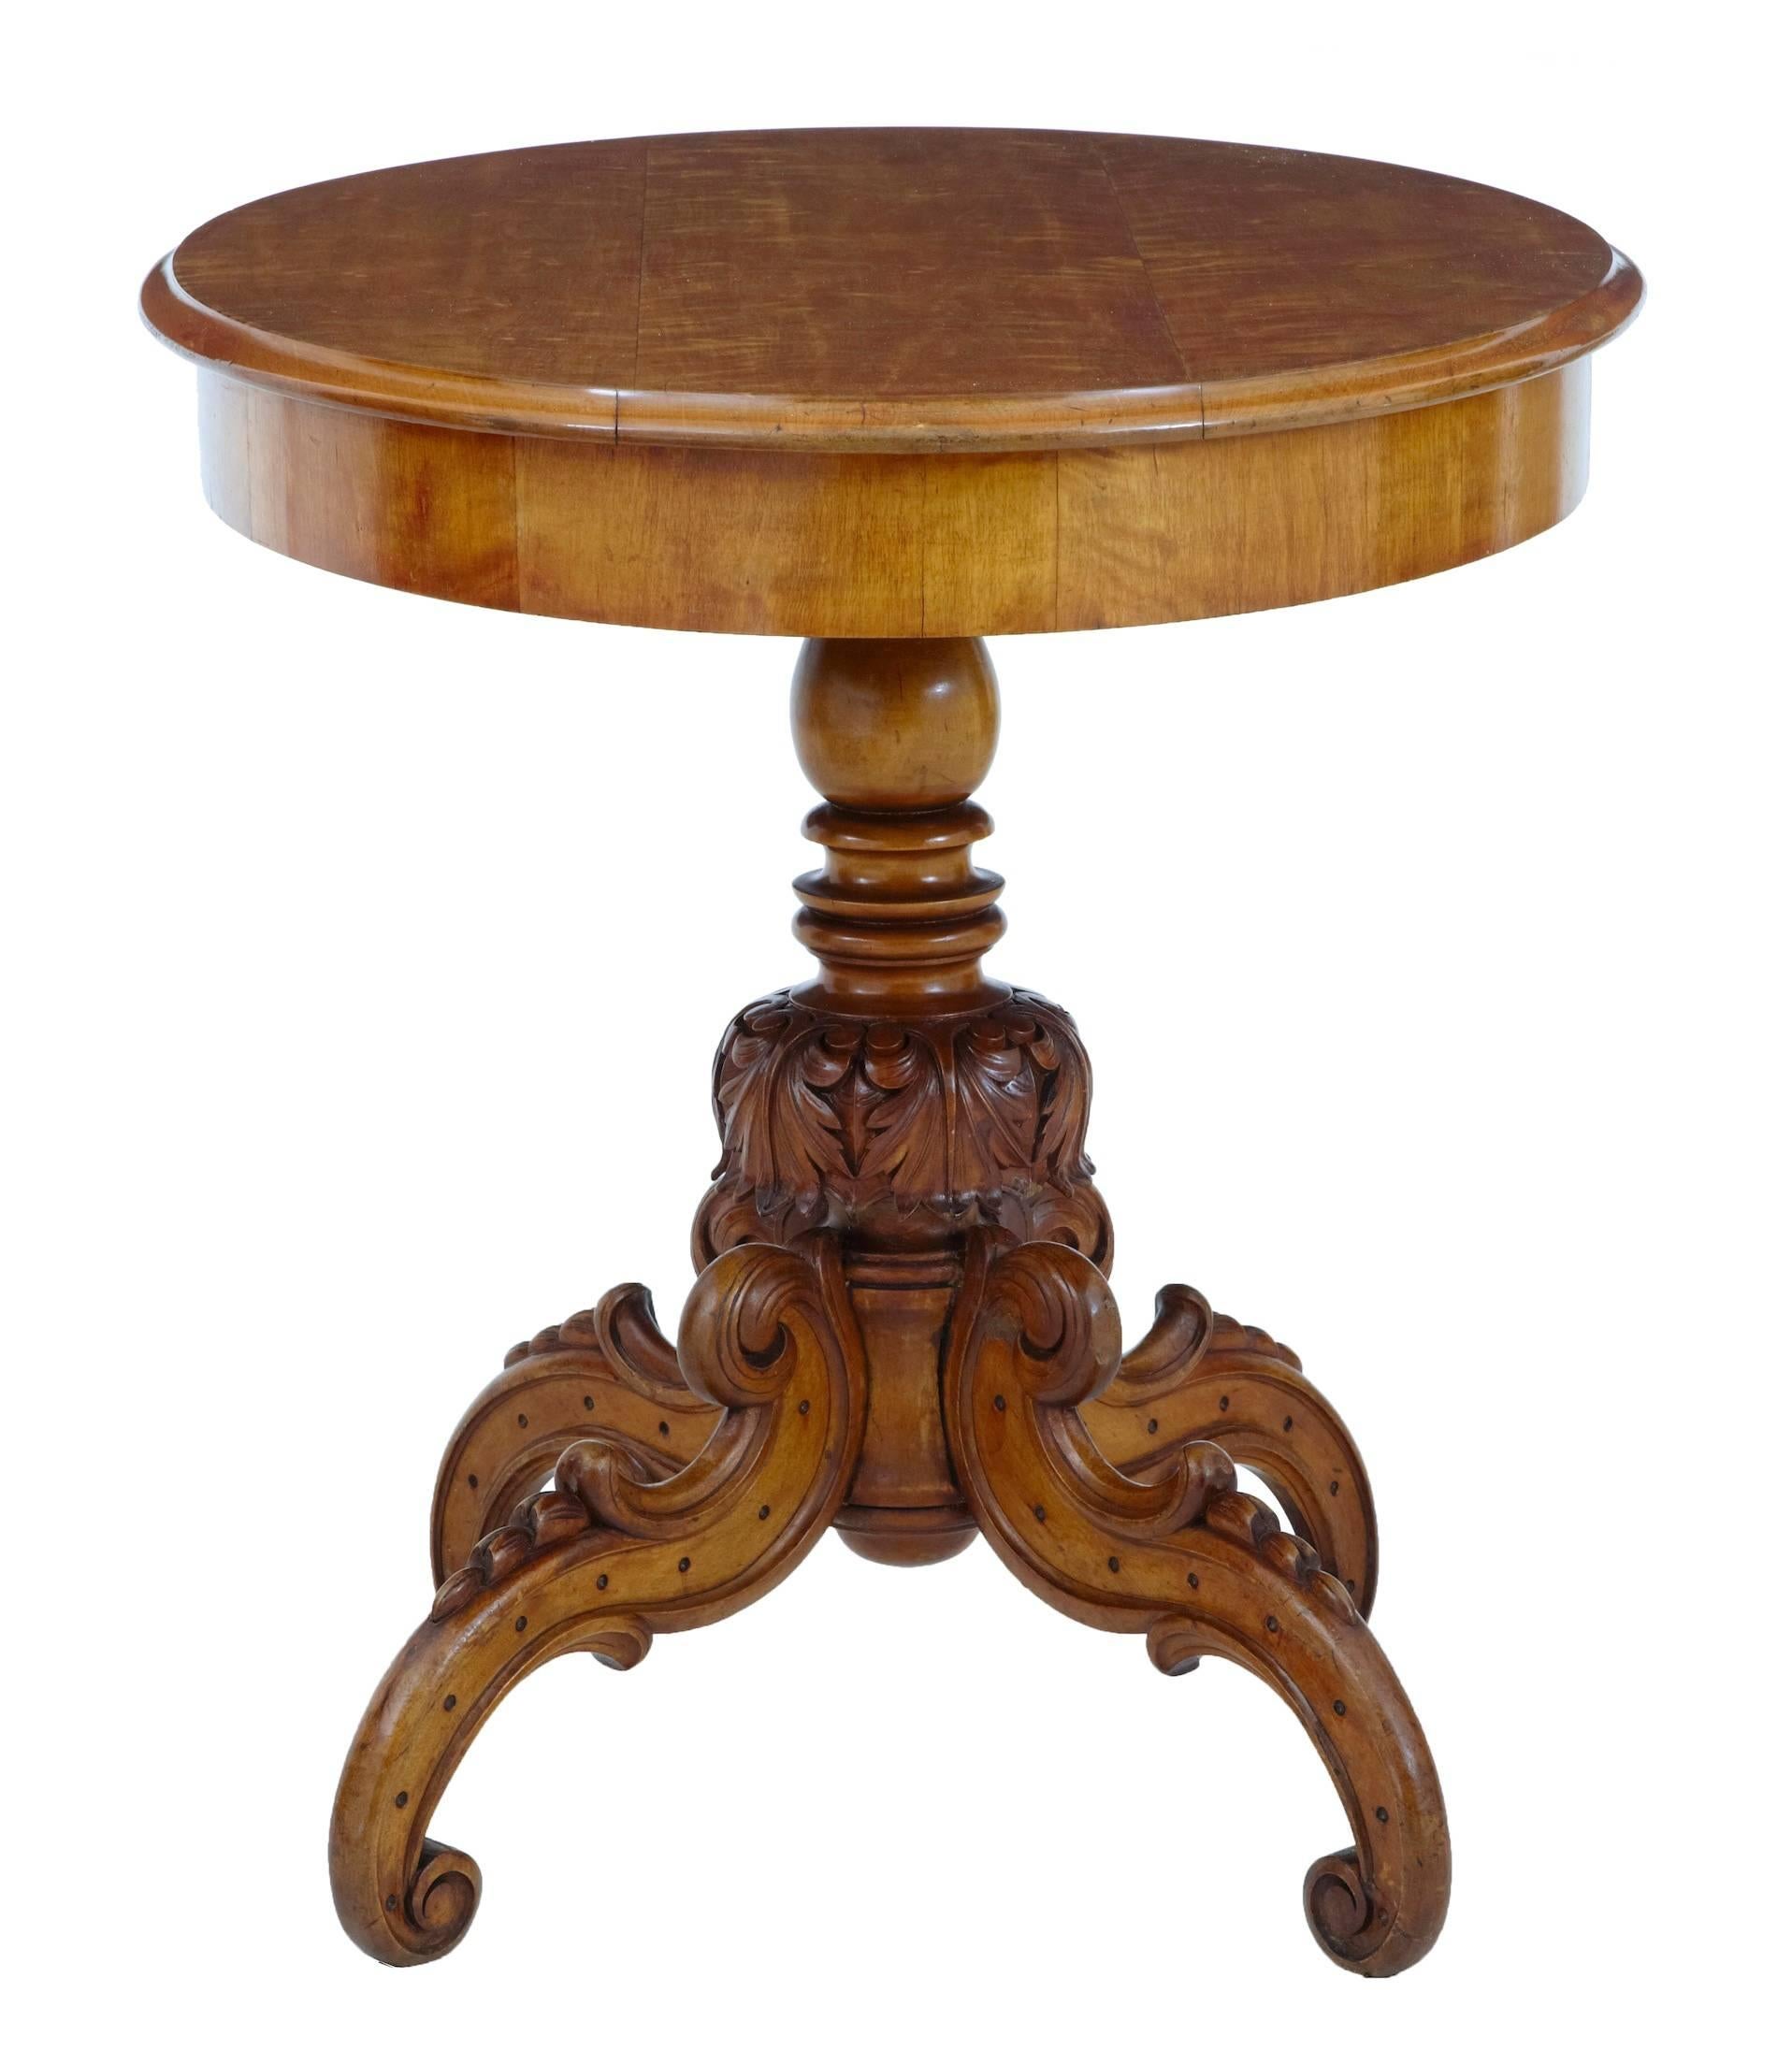 Swedish oval center table, circa 1870.
Rich golden color.
Turned and carved stem, standing on four scrolling legs.

Some minor losses to carving on stem.

Measures: Height 30 1/2